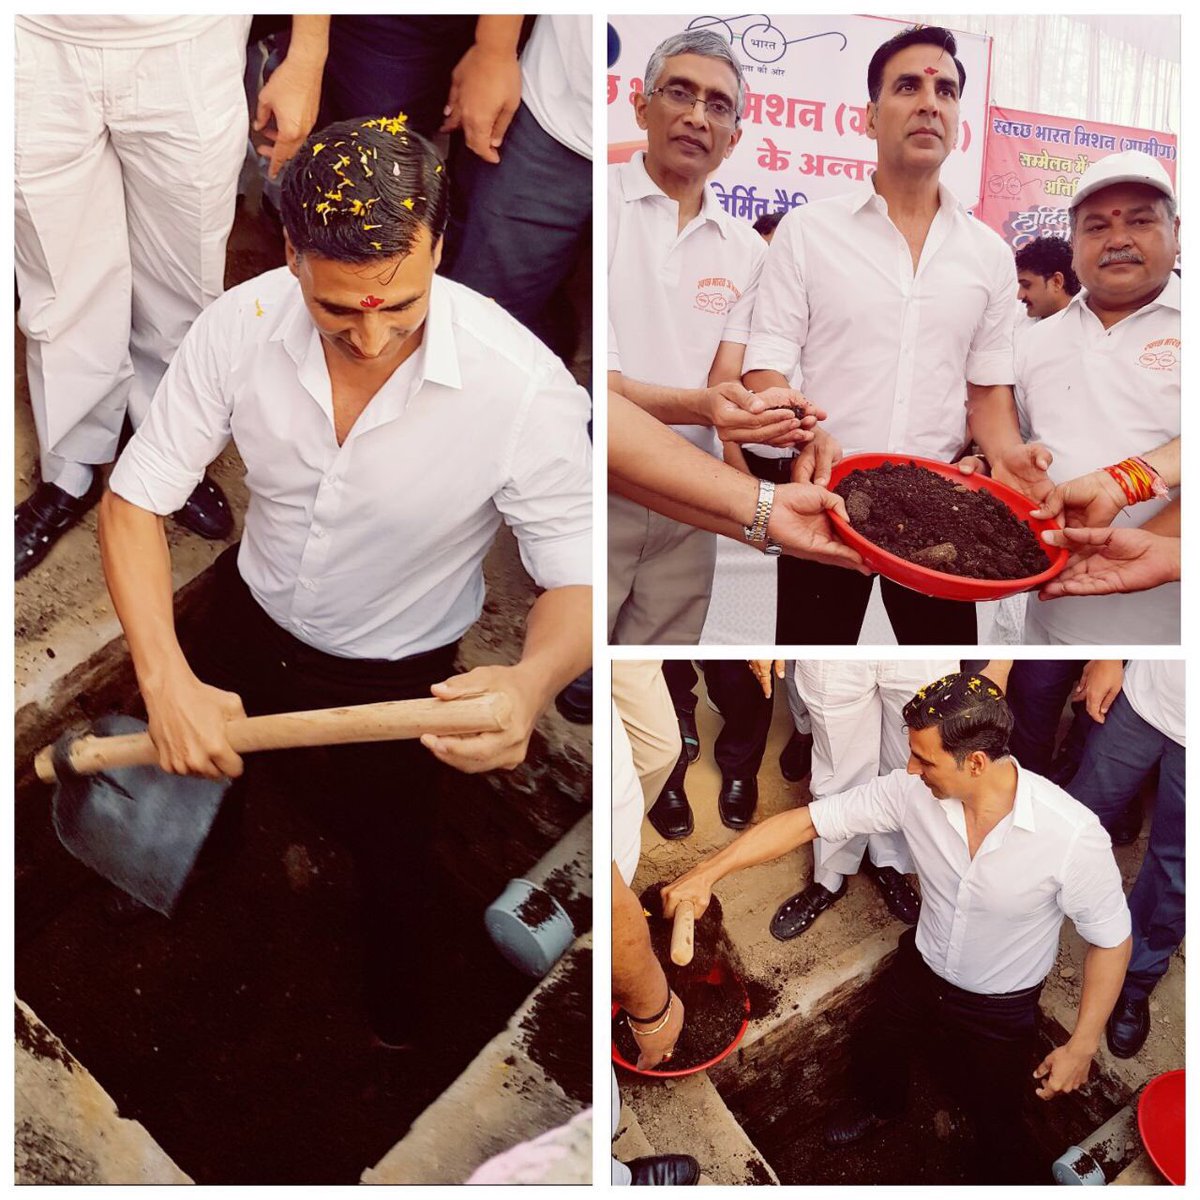 Digging my 1st #TwoPitToilet in Khargone District of MP with Minister Narendra Singh Tomar #MakeTheChange #WasteToWealth